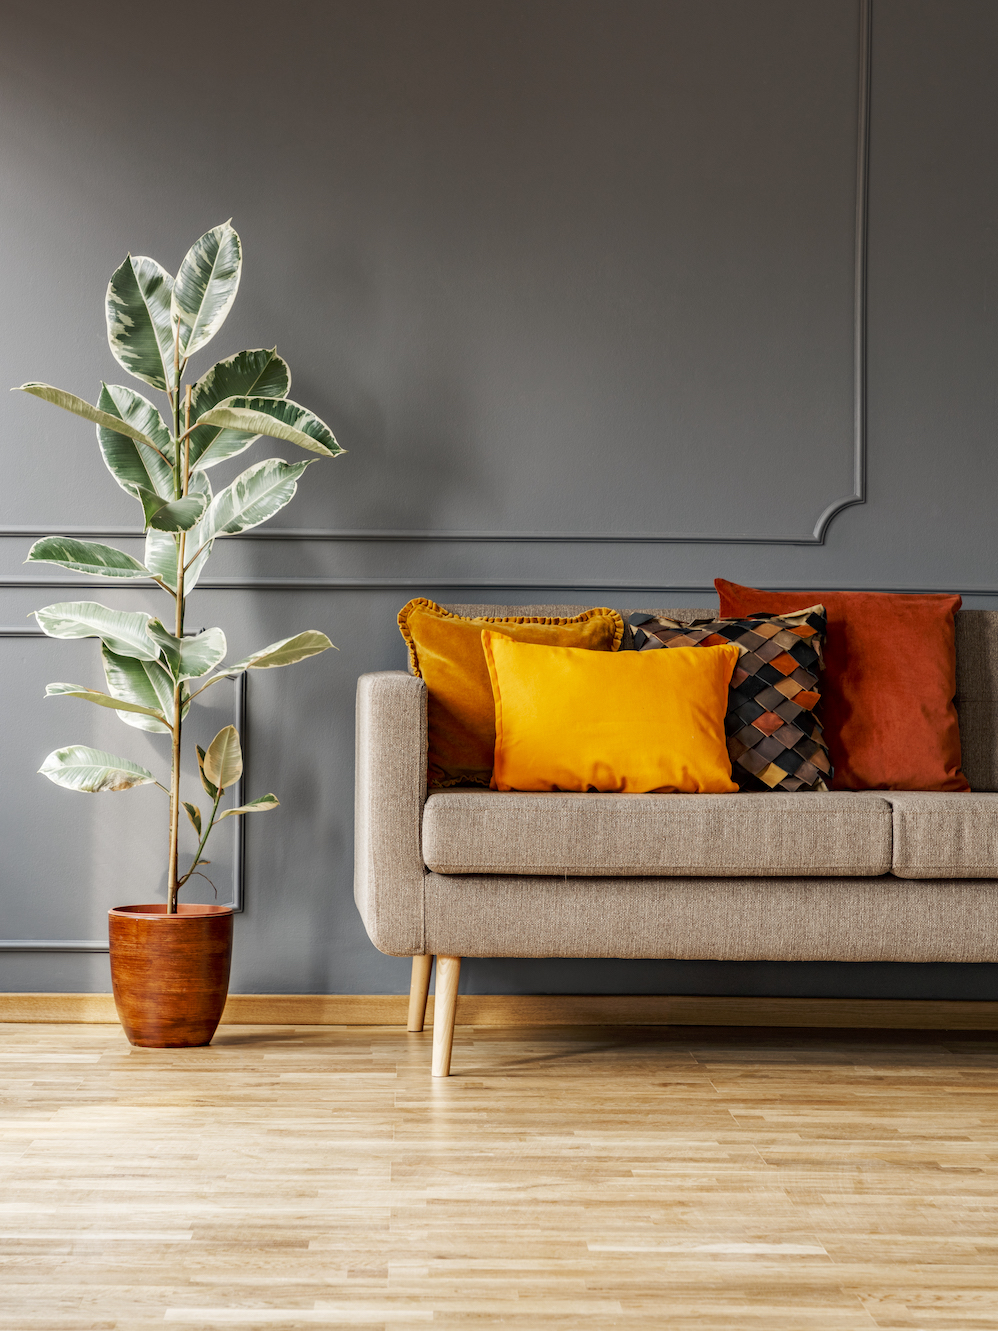 Ficus next to brown sofa with orange cushions in grey living room interior. Real photo. Paste your poster here